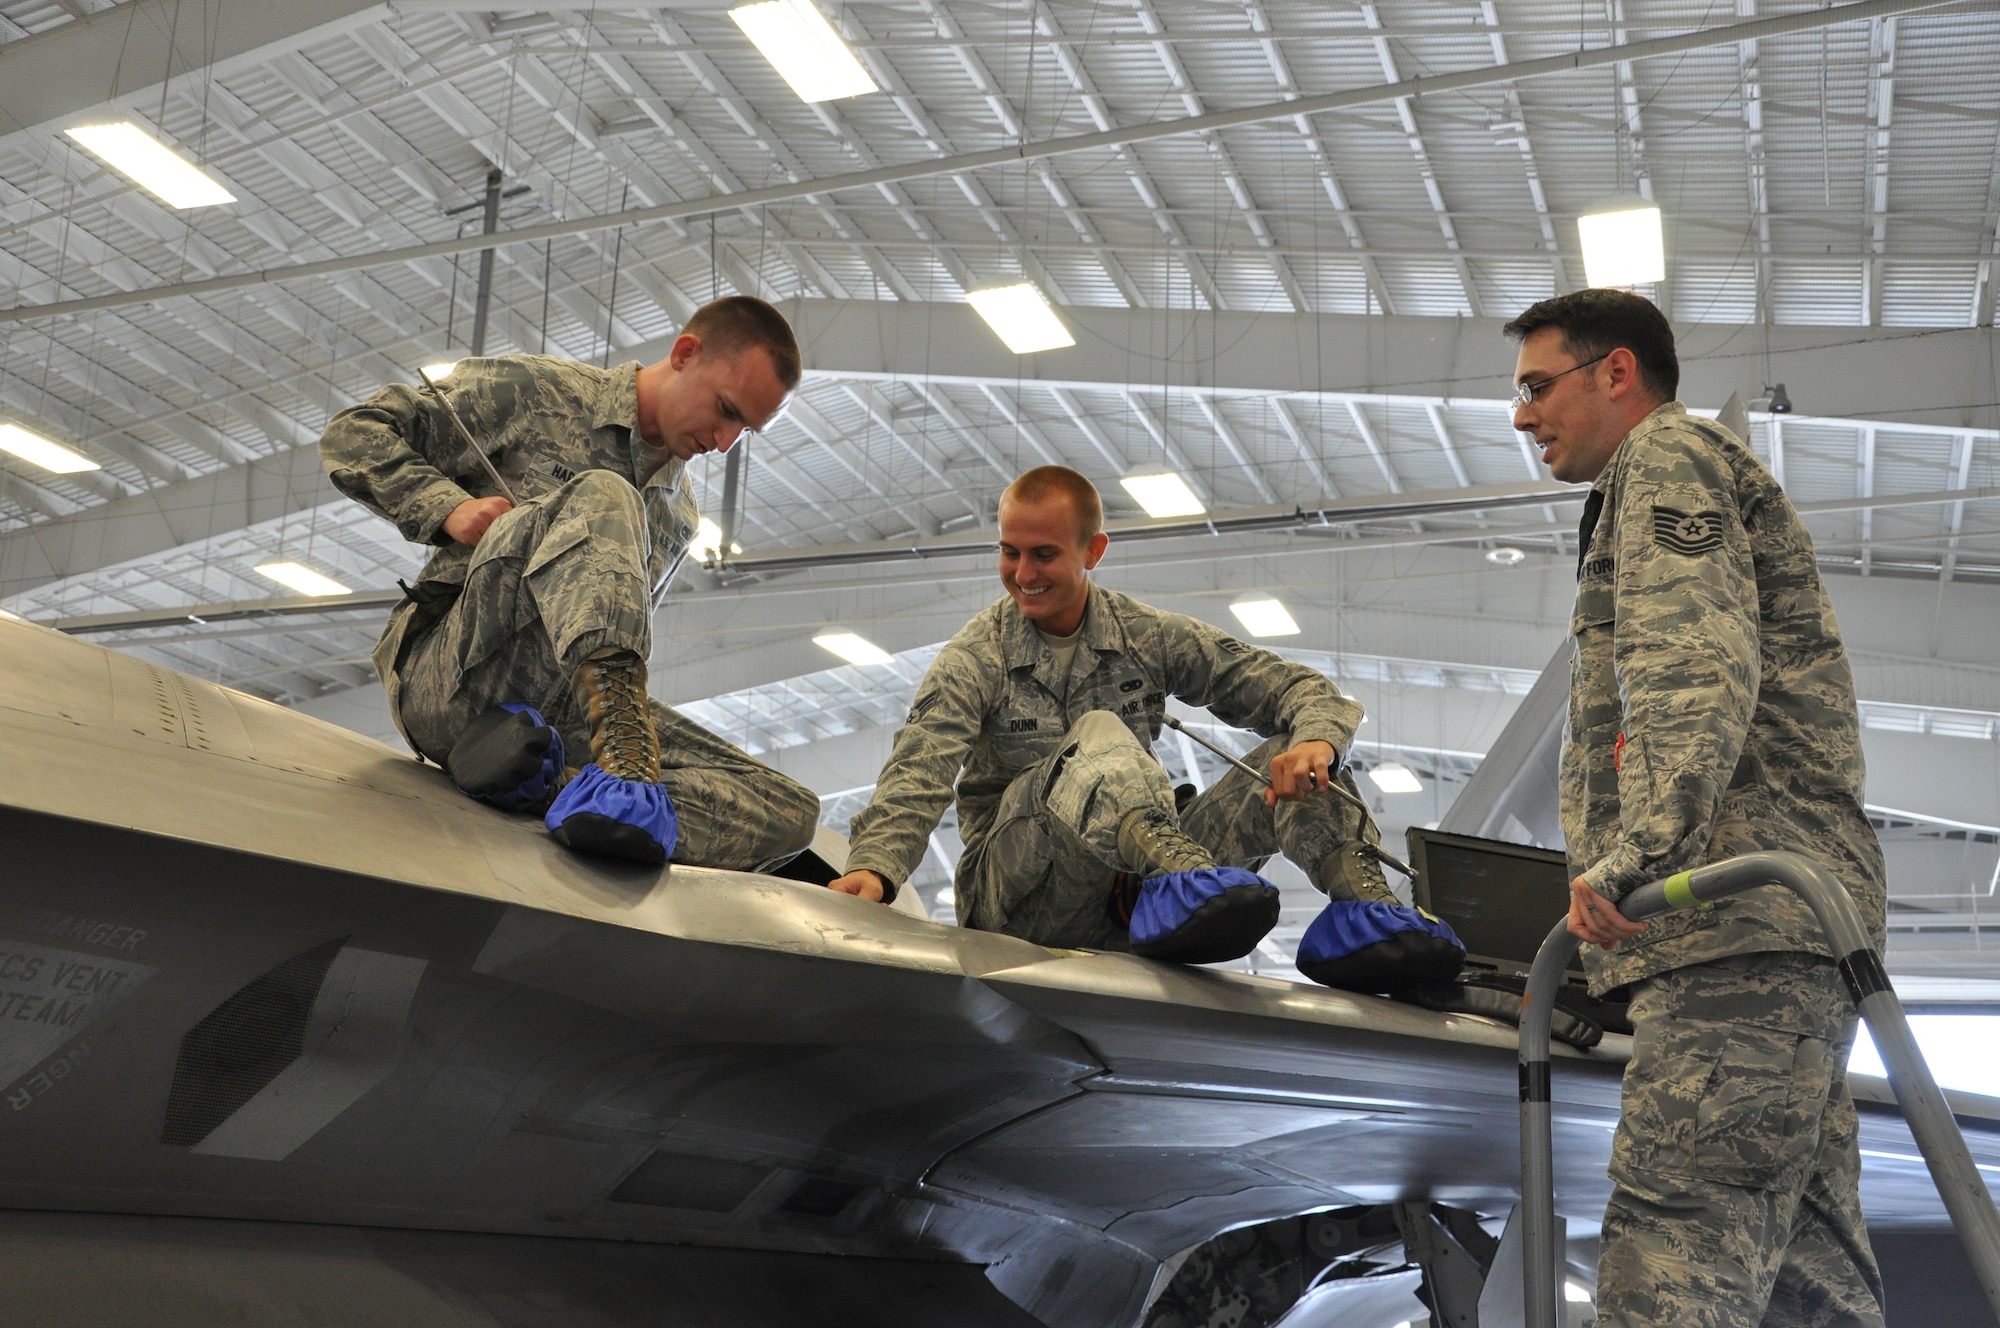 Tech. Sgt. Kraig Callais, 43rd Aircraft Maintenance Unit avionics fleet health manager; Senior Airman Christopher Dunn, 43rd AMU F-22 specialist; and Airman 1st Class Kenan Harvey, 43rd AMU F-22 specialist, address an issue of an F-22 Raptor as part of Avionics Health of the Fleet inside the hangar of the 43rd AMU at Tyndall Air Force Base, Fla. AVHOF is a program implemented to increase the number of fully mission capable F-22s on Tyndall’s flight line. (U.S. Air Force photo by Airman 1st Class Alex Echols)